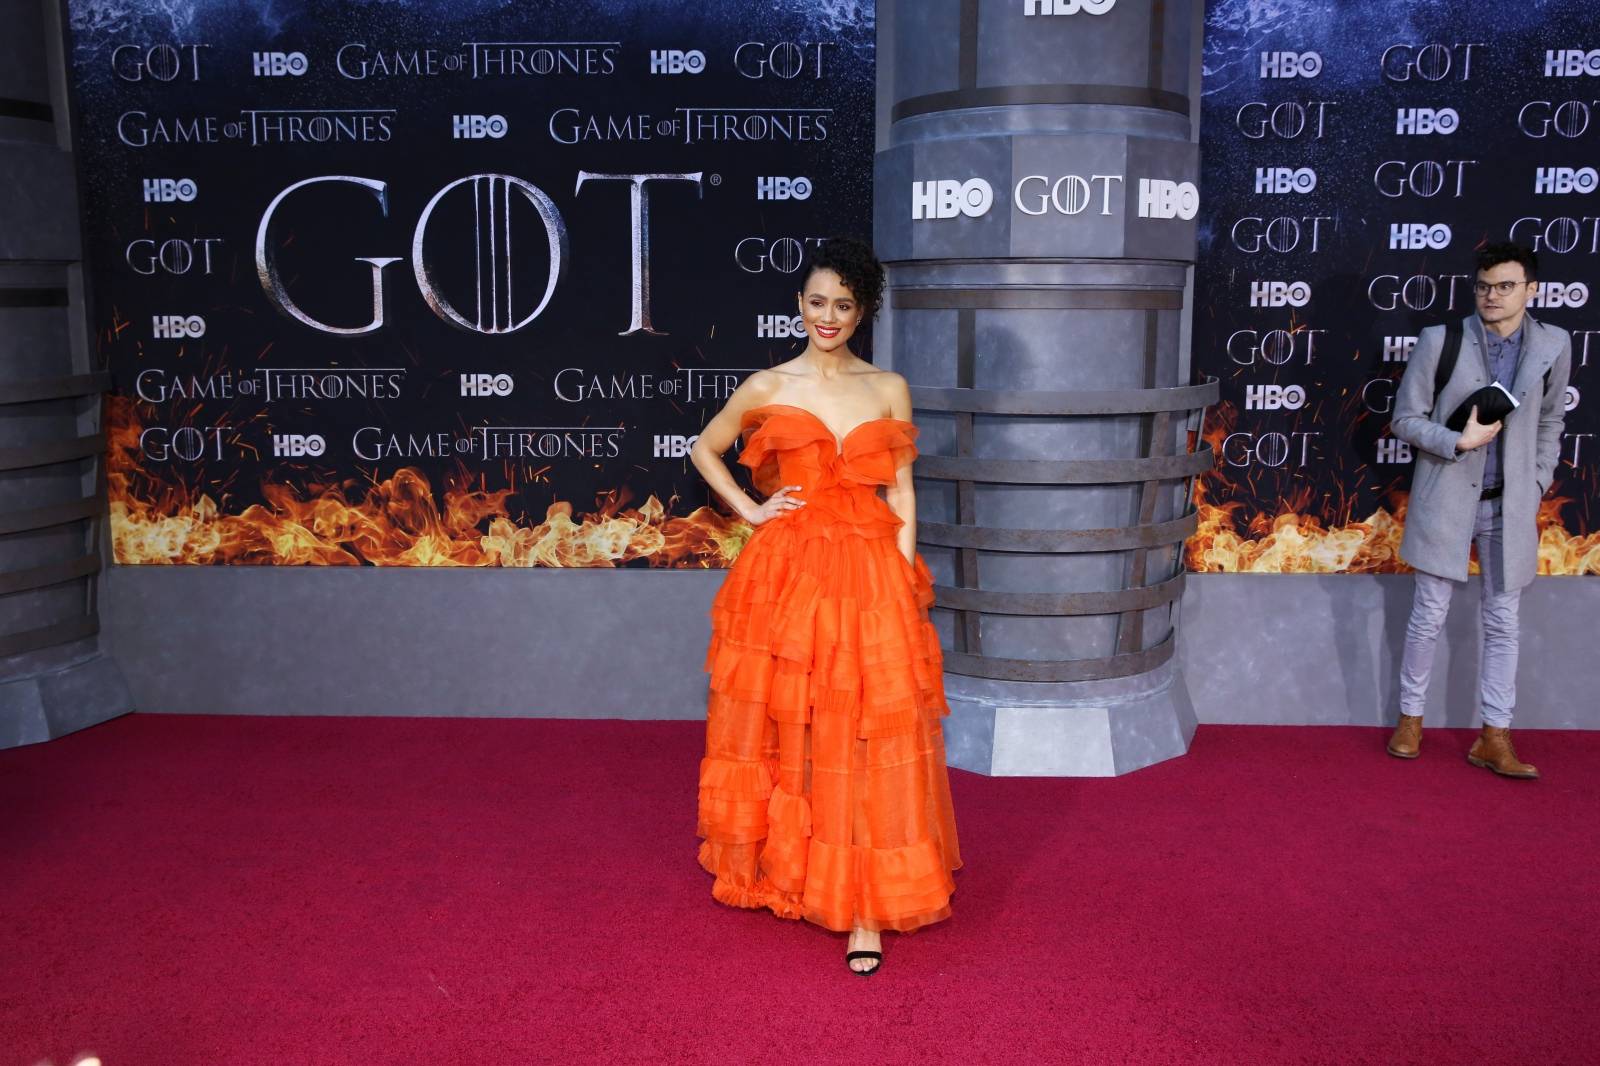 Nathalie Emmanuel arrives for the premiere of the final season of "Game of Thrones" at Radio City Music Hall in New York